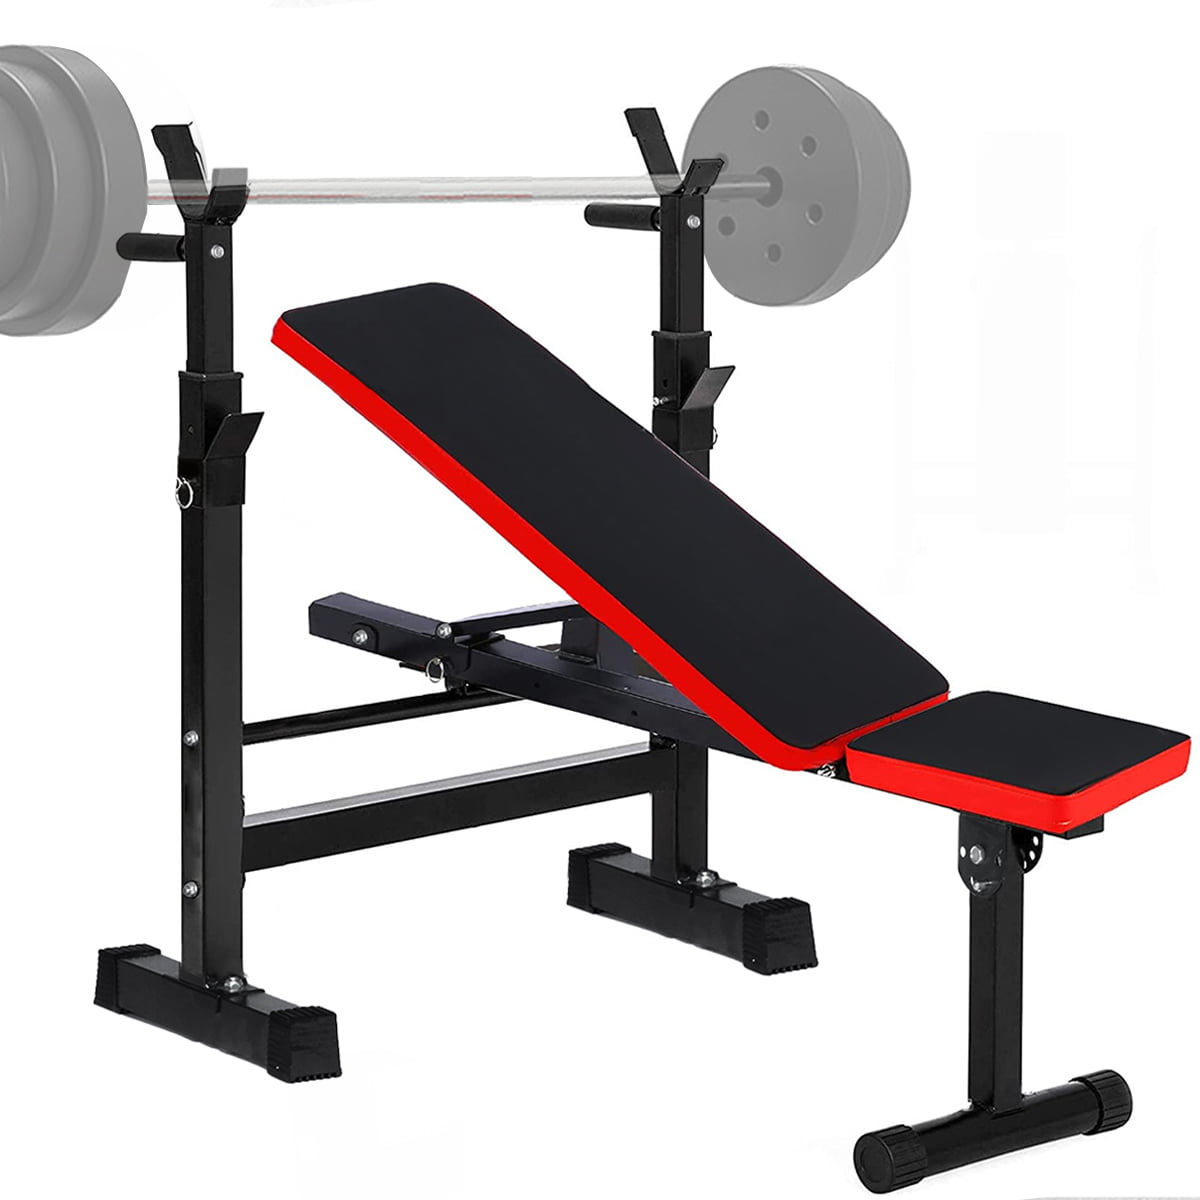 Weight Bench Press Adjustable Incline Fitness Multi Gym Home Dumbell Bicep Curl 